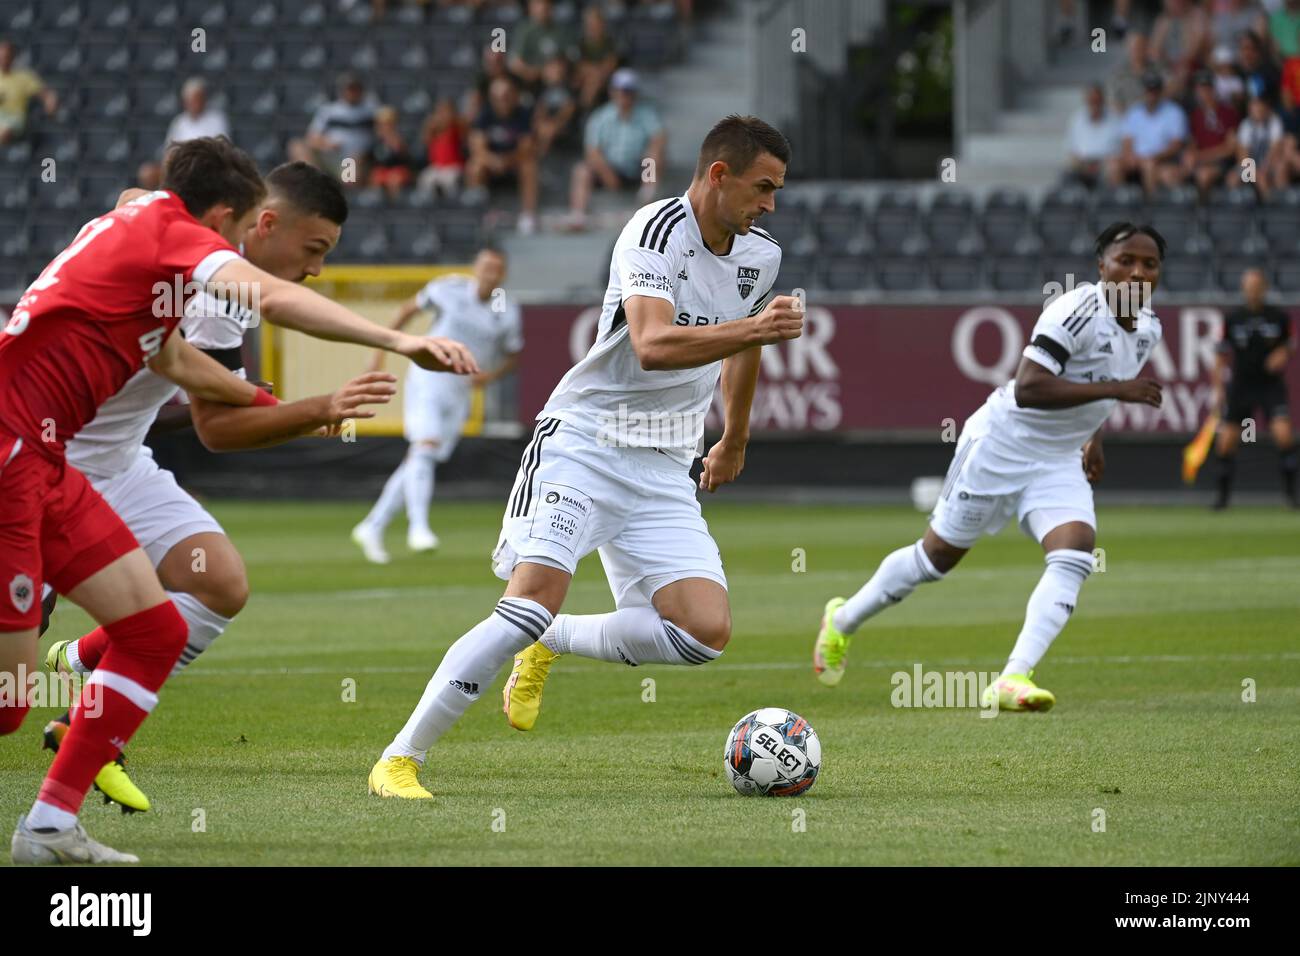 Eupen's Smail Prevljak fights for the ball during a soccer match between KAS Eupen and Royal Antwerp FC RAFC, Sunday 14 August 2022 in Eupen, on day 4 of the 2022-2023 'Jupiler Pro League' first division of the Belgian championship. BELGA PHOTO JOHN THYS Stock Photo